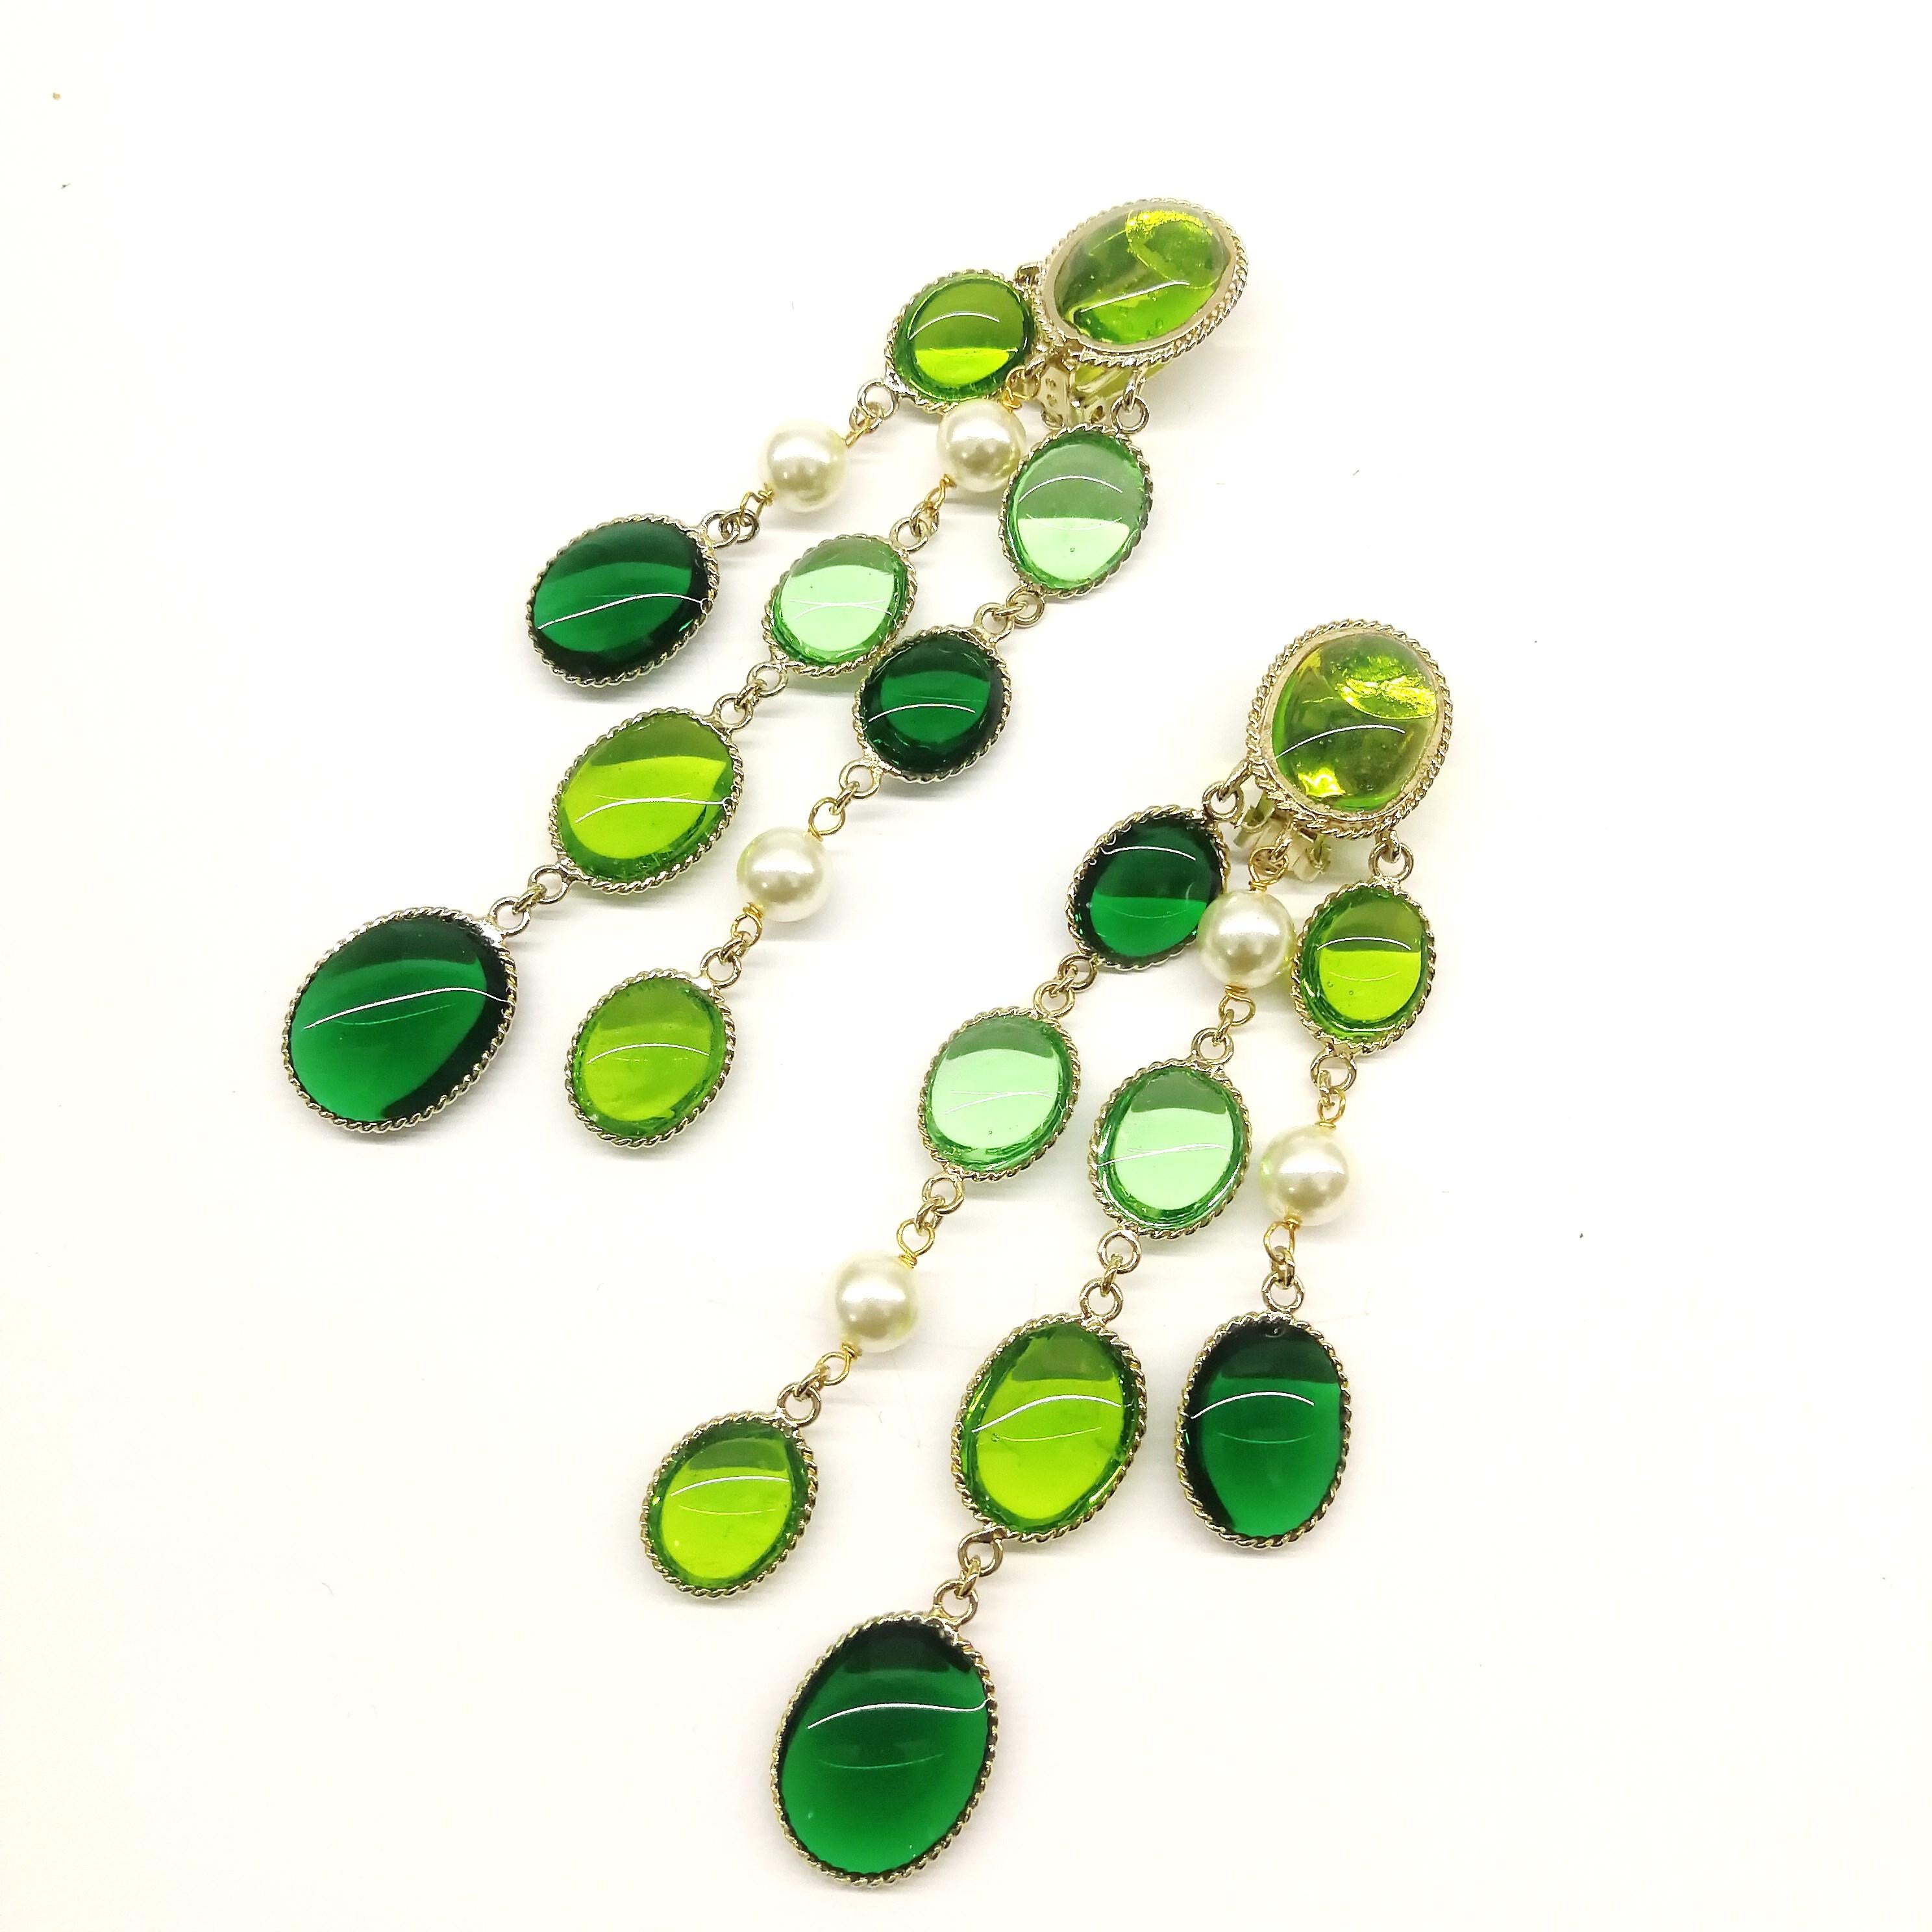 'WW' emerald and peridot poured glass, pearl 'Harlequin' drop earrings, 2018 For Sale 6